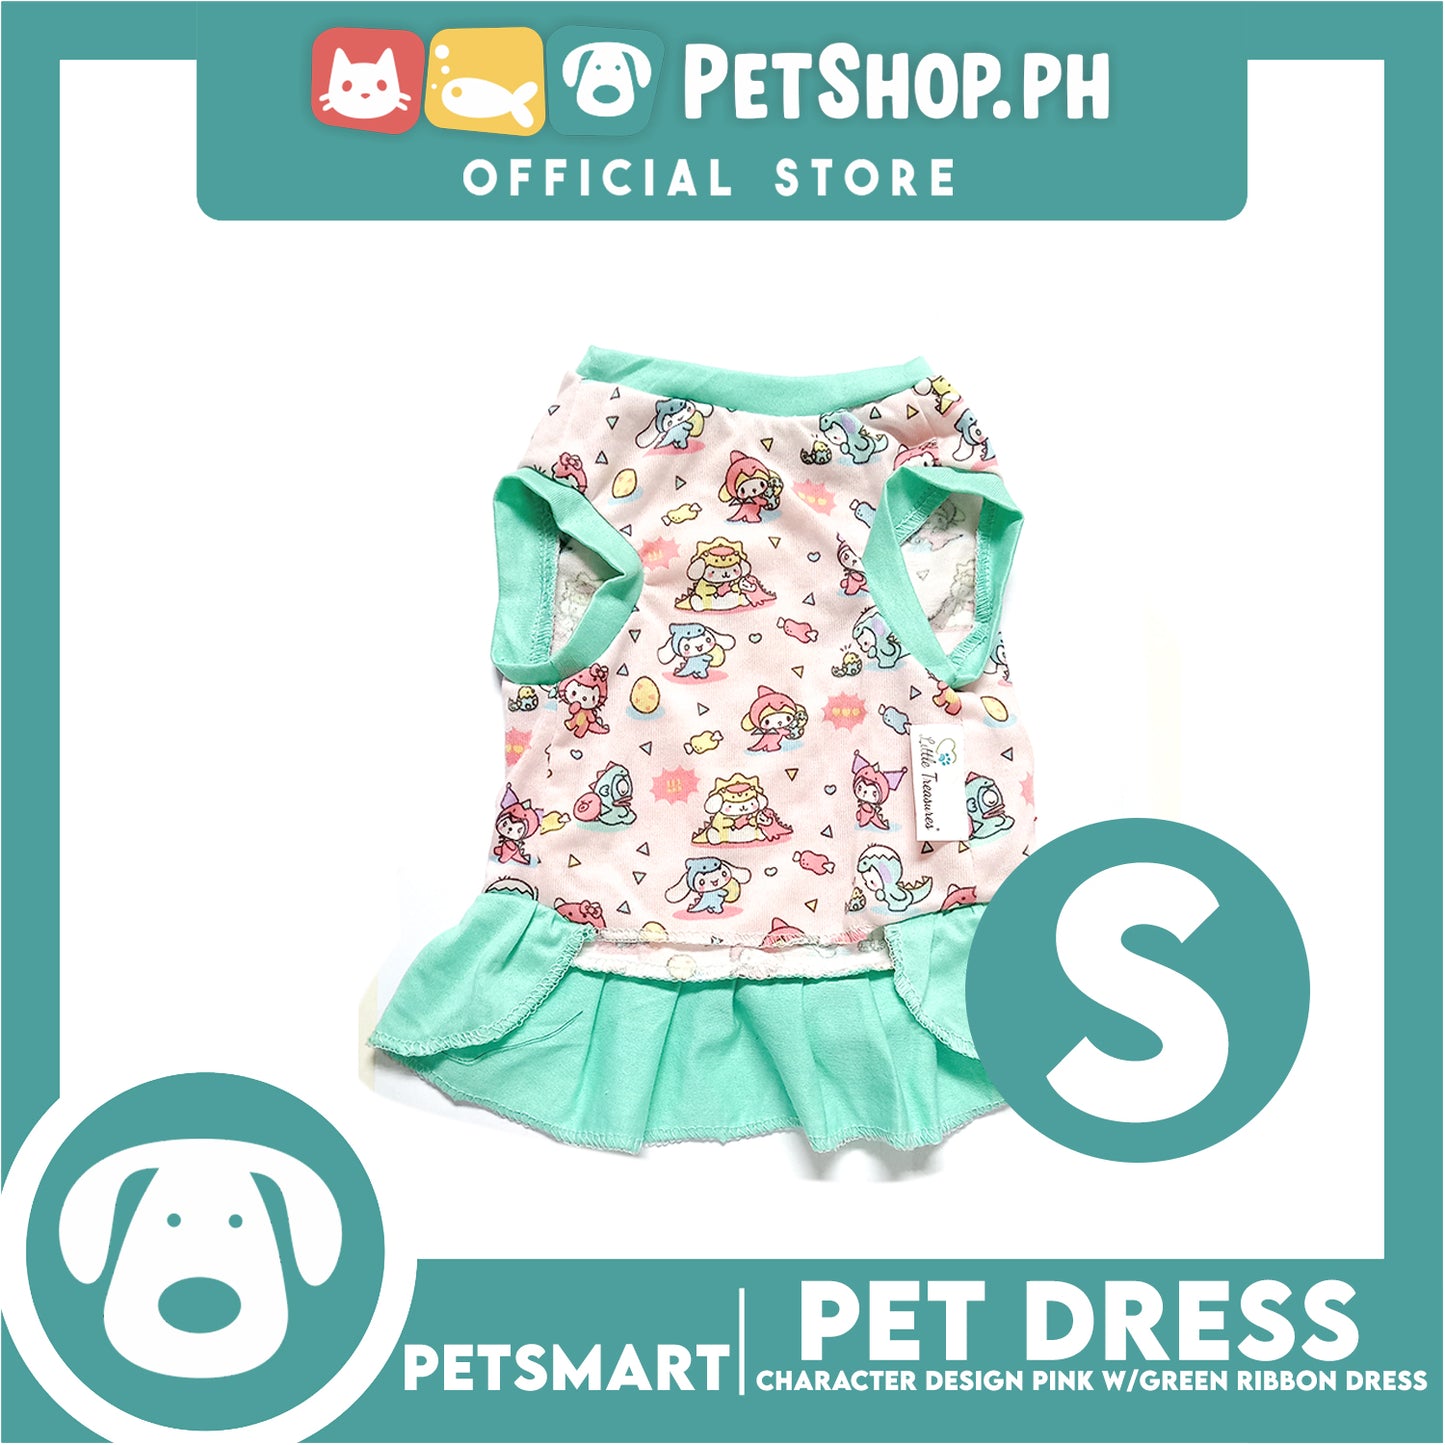 Pet Dress With Character Design Pink With Green Ribbon Dress DG-CTN119S (Small) Perfect Fit For Dogs And Cats, Pet Dress Clothes, Soft and Comfortable Pet Clothing